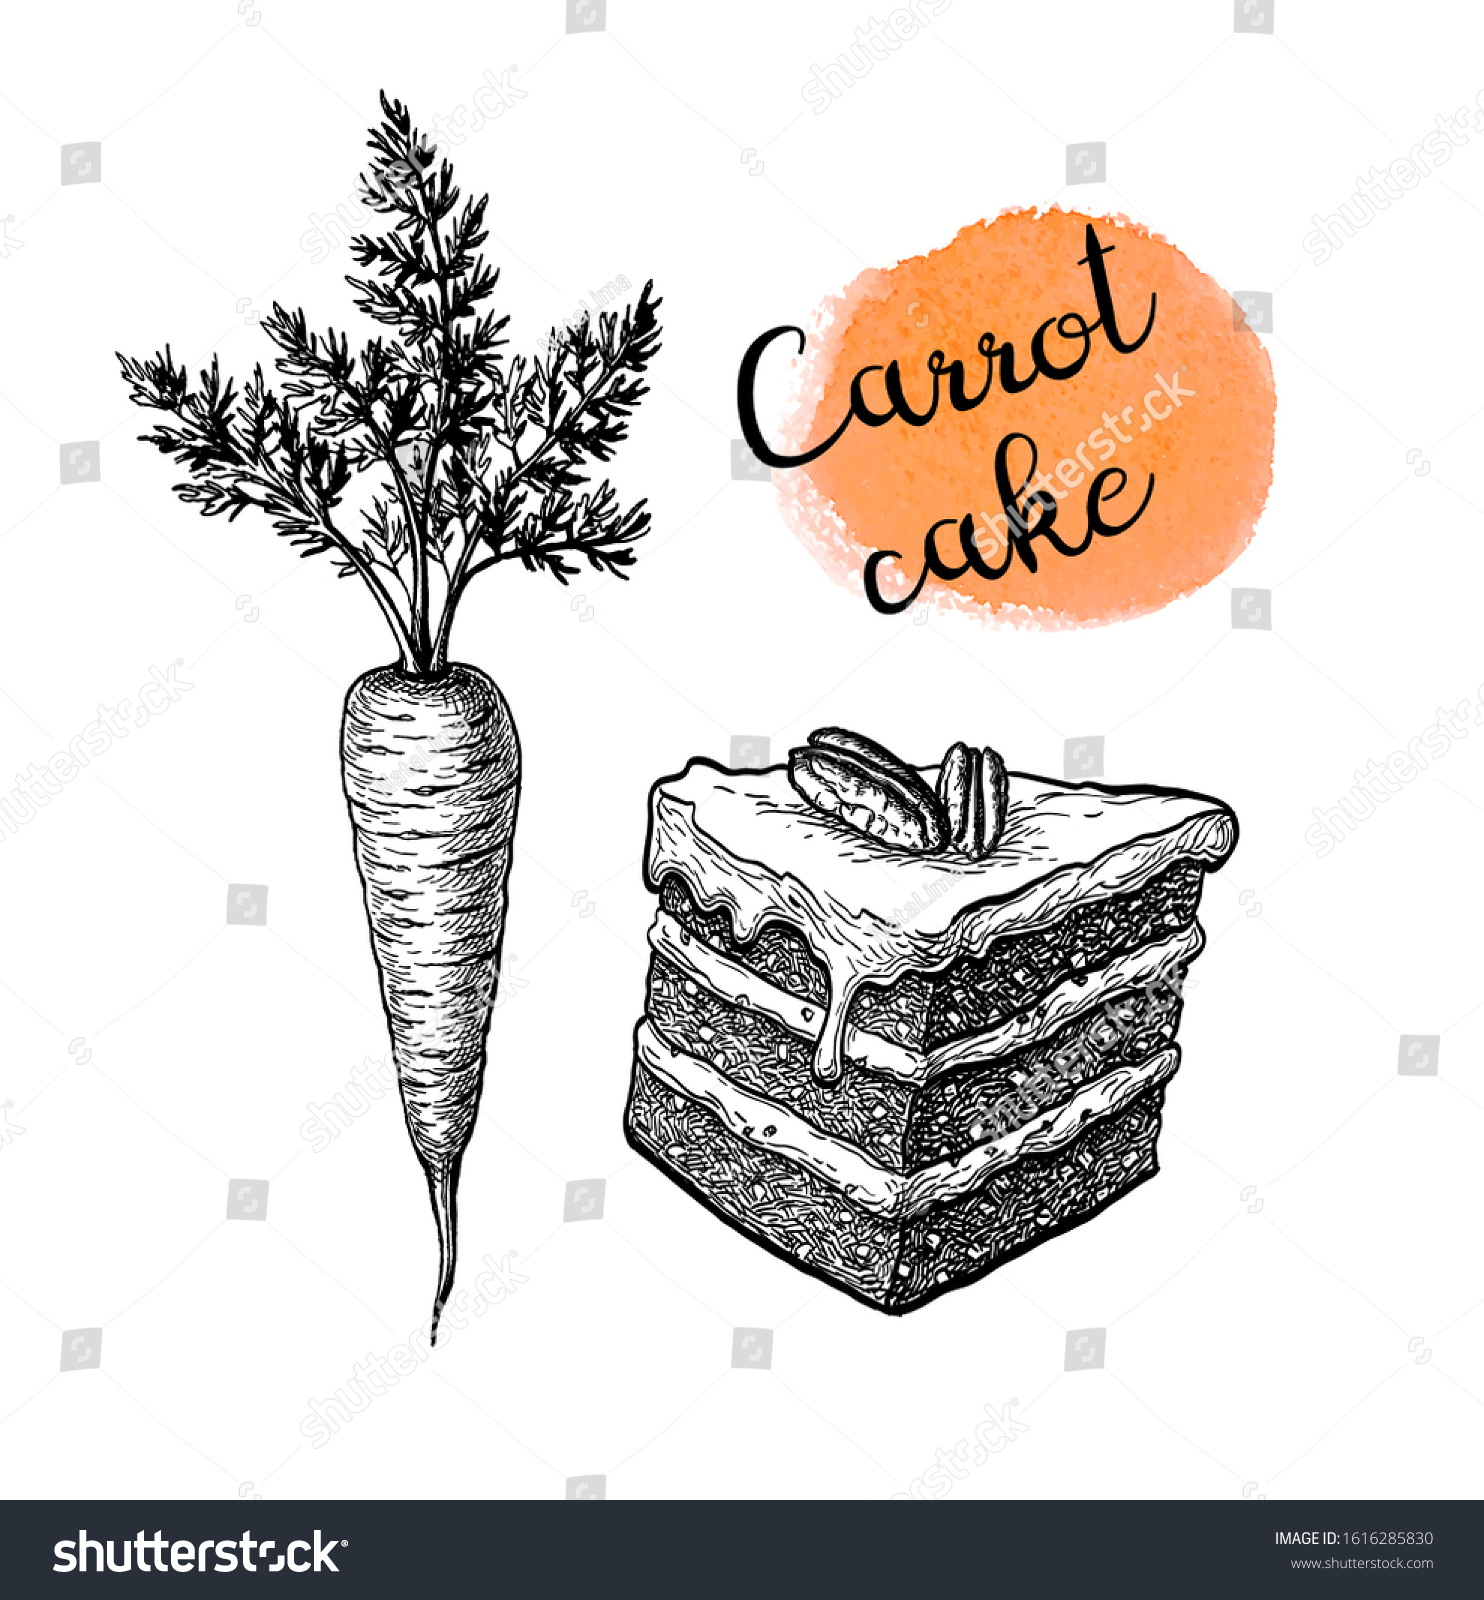 SVG of Carrot cake. Ink sketch isolated on white background. Hand drawn vector illustration. Retro style. svg